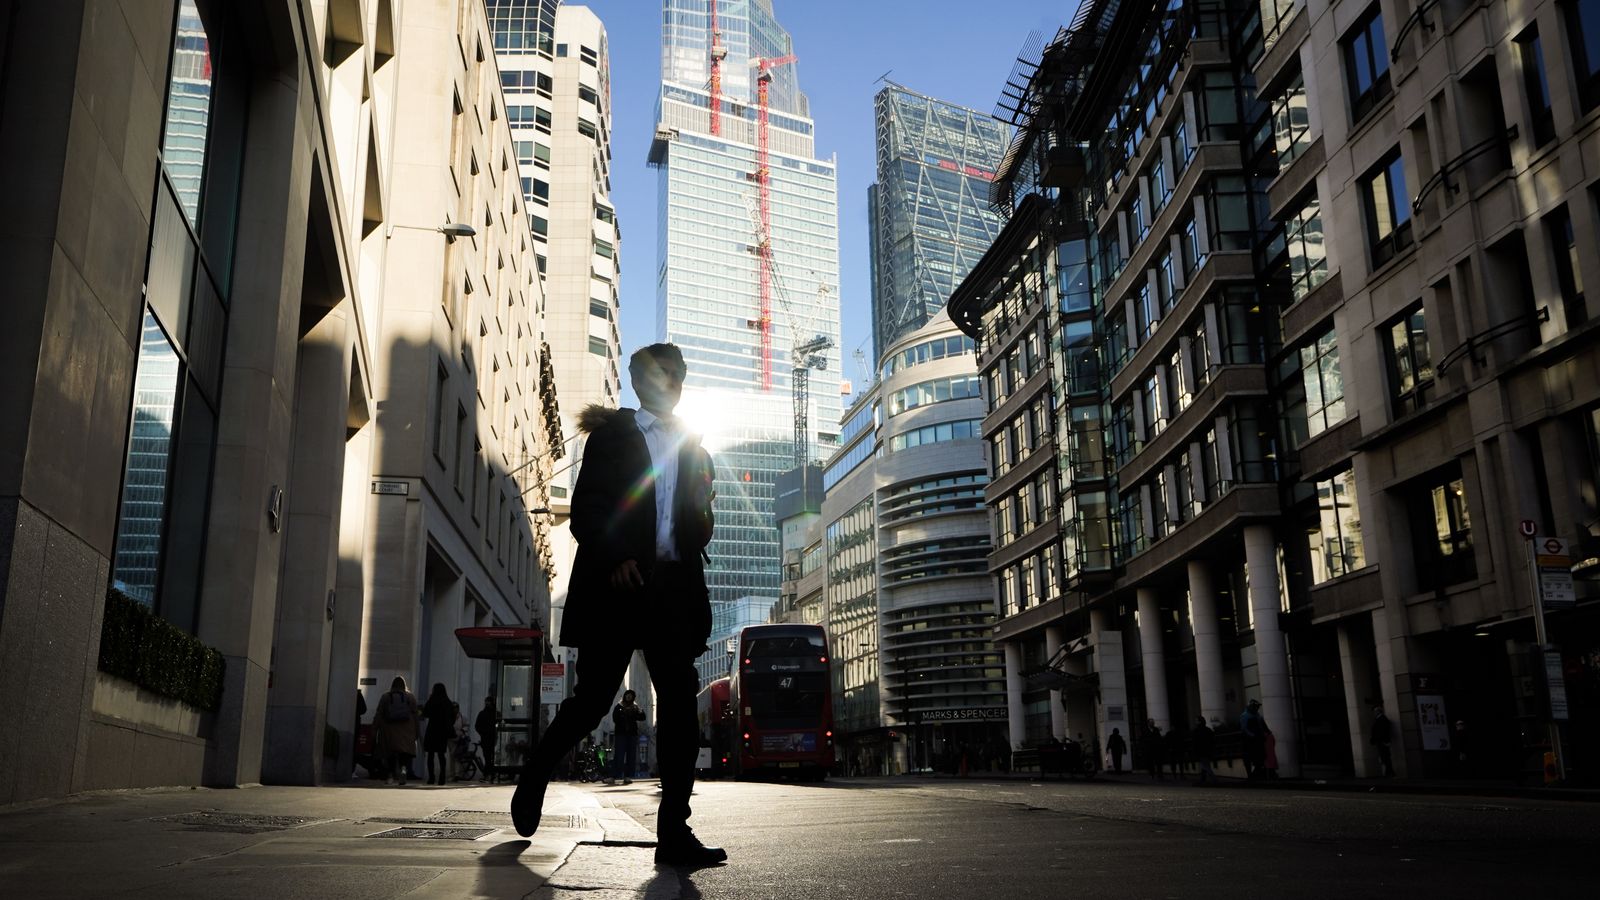 FTSE 100 bosses earn typical UK annual salary in three days - thinktank